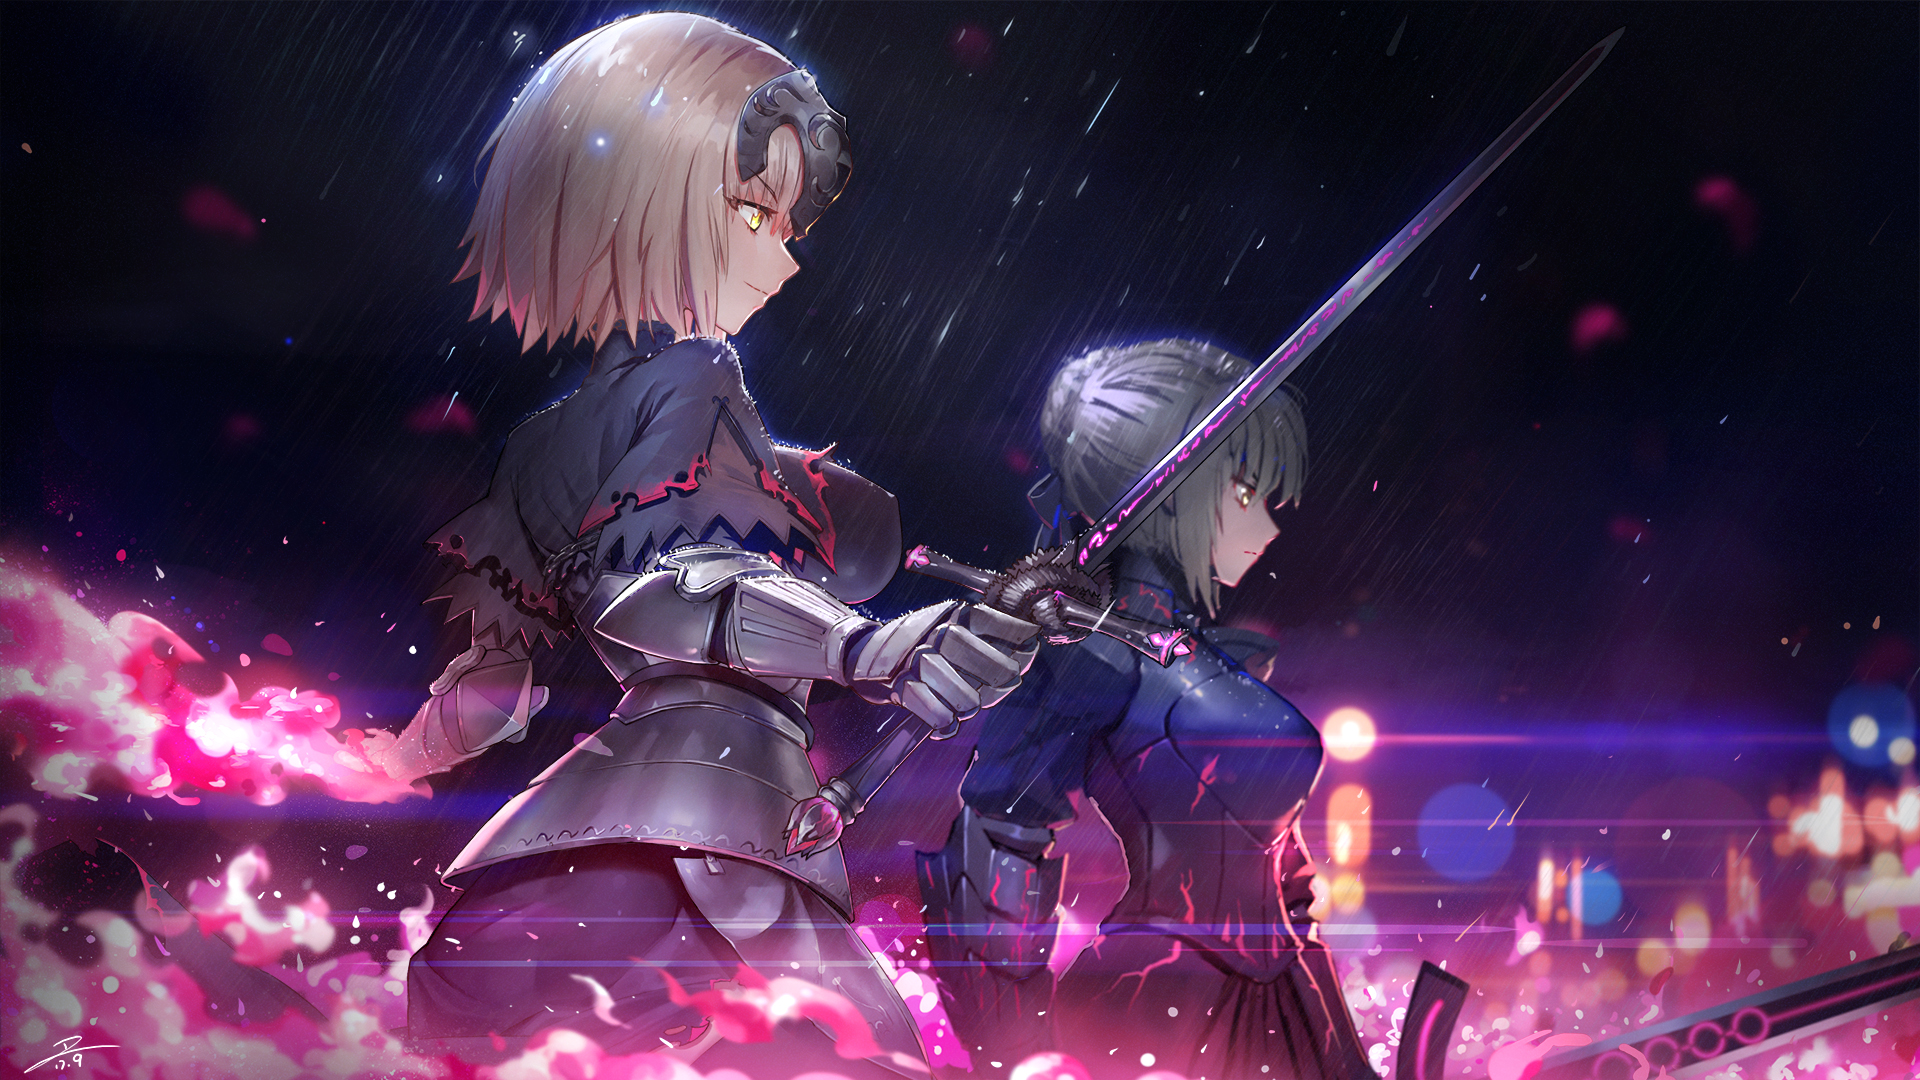 fate order download